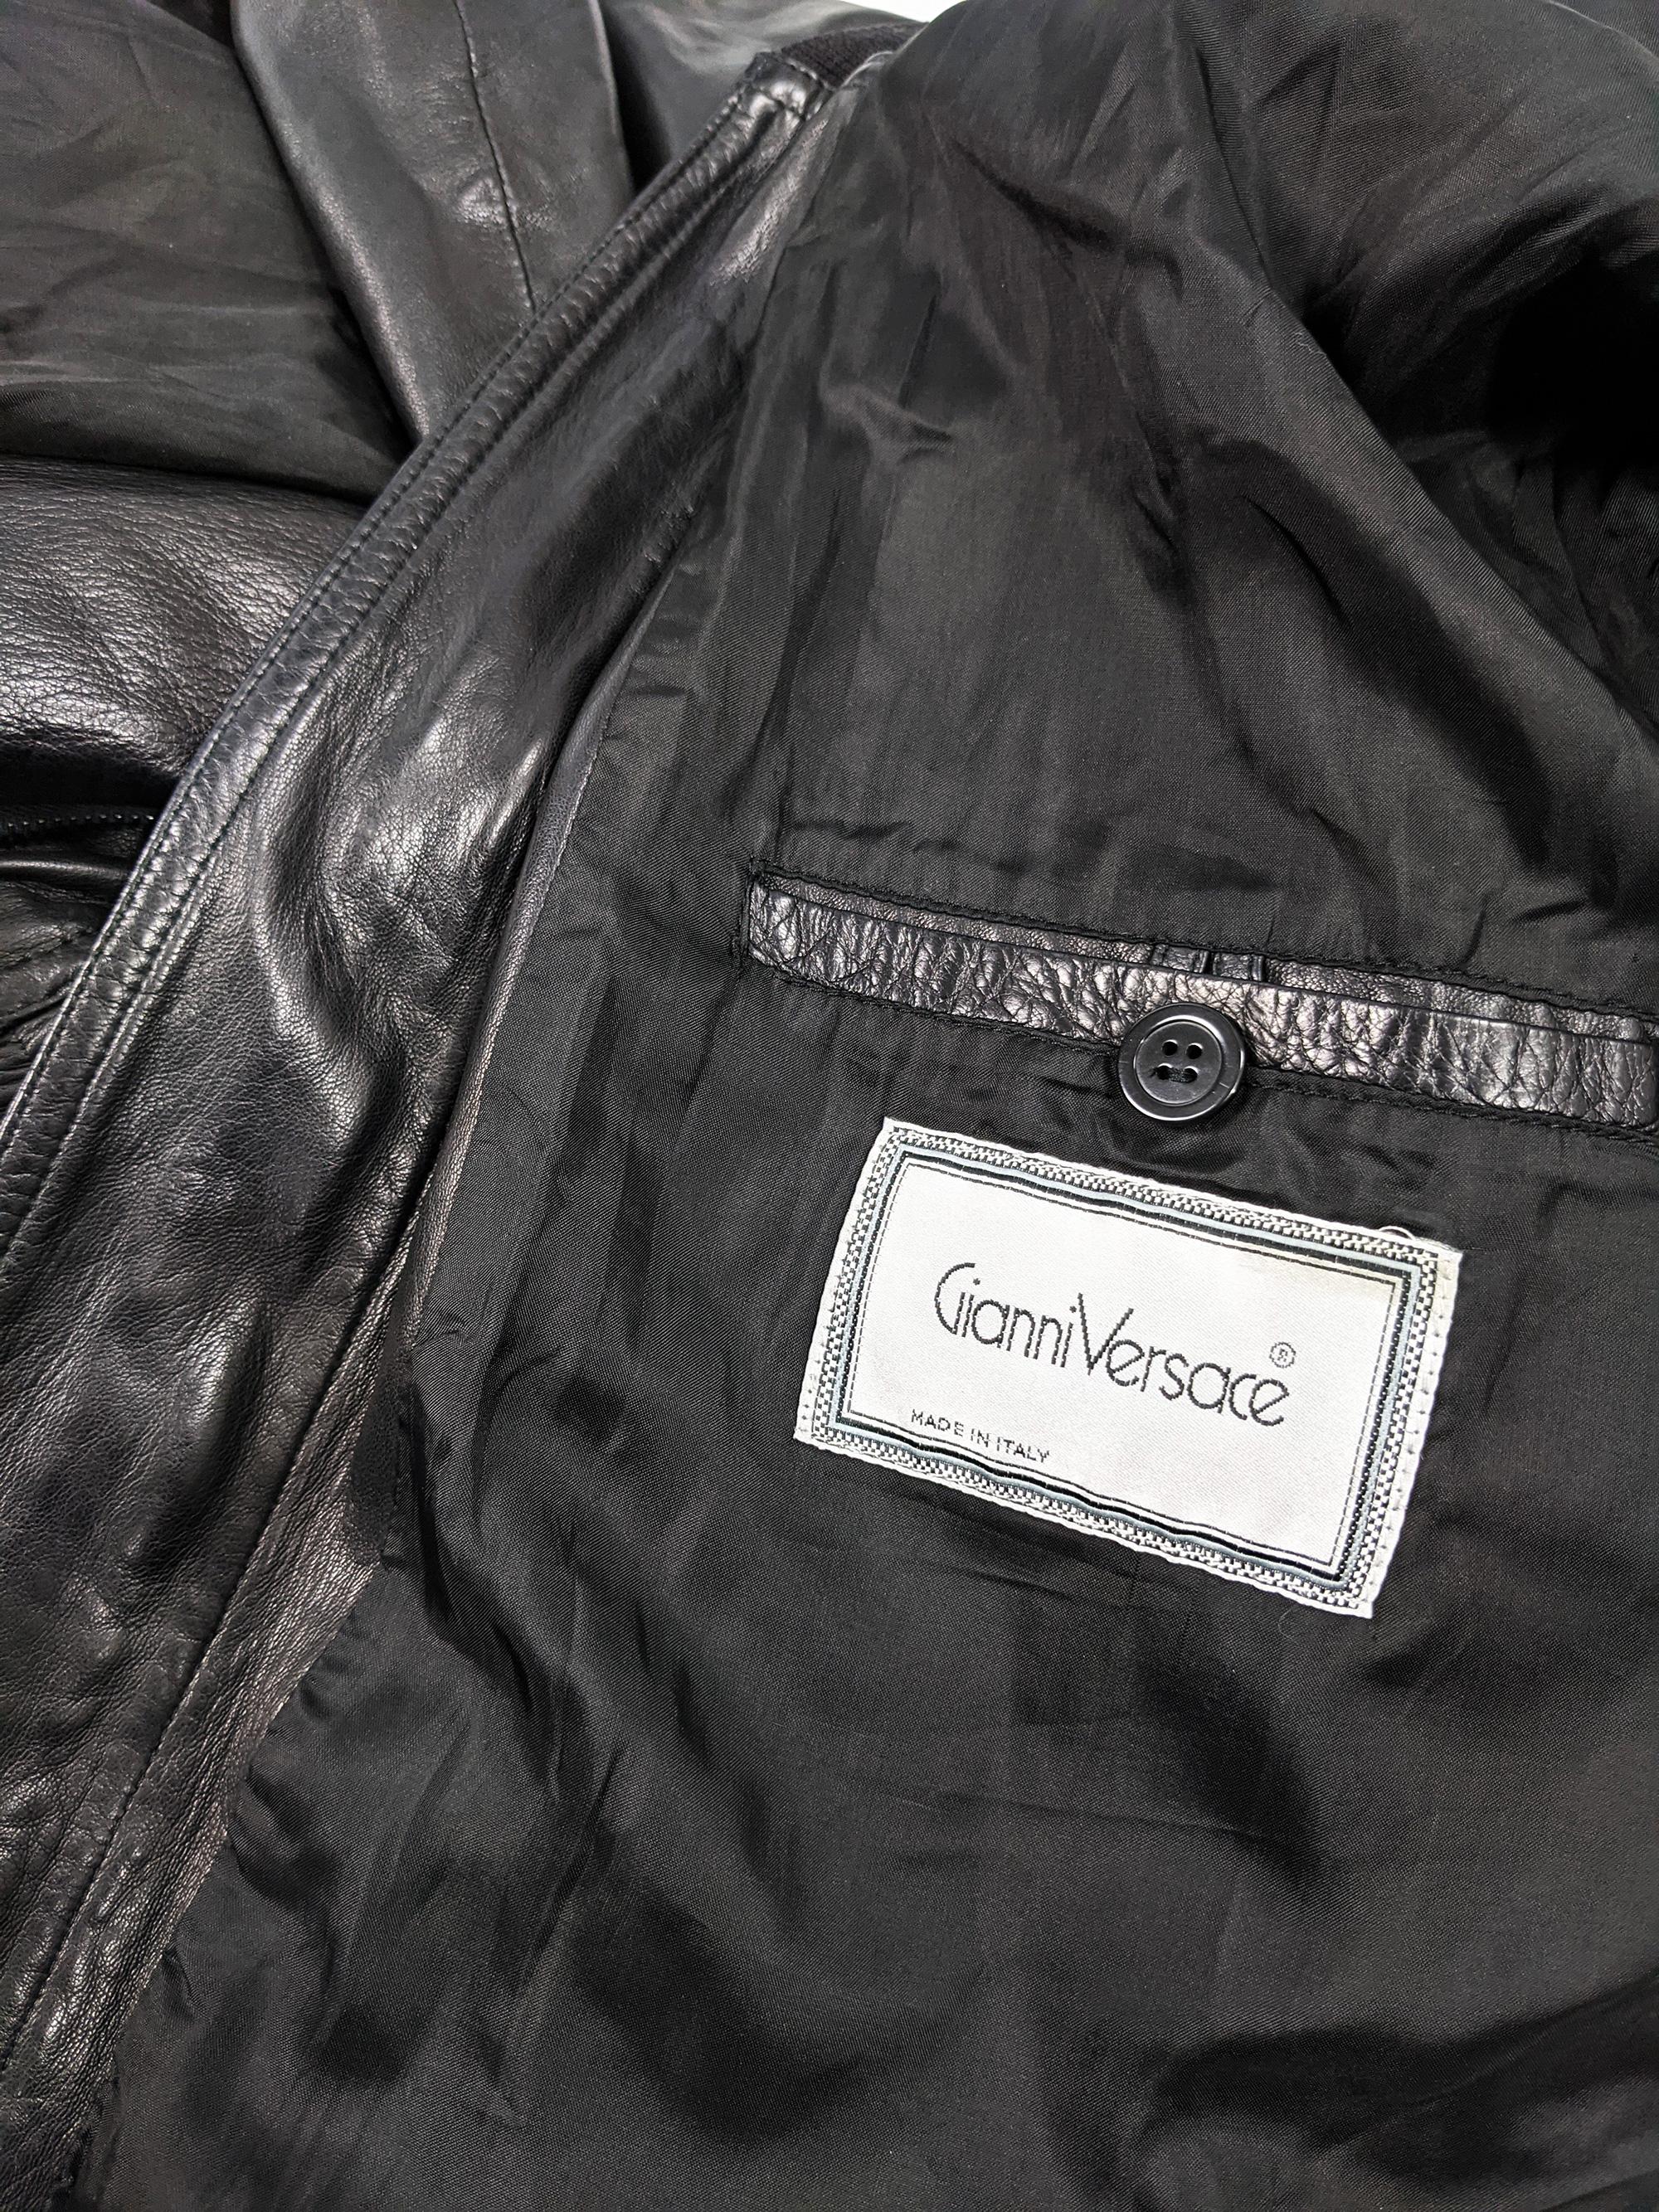 Gianni Versace Rare Mens Leather Jacket, A/W 1986 1